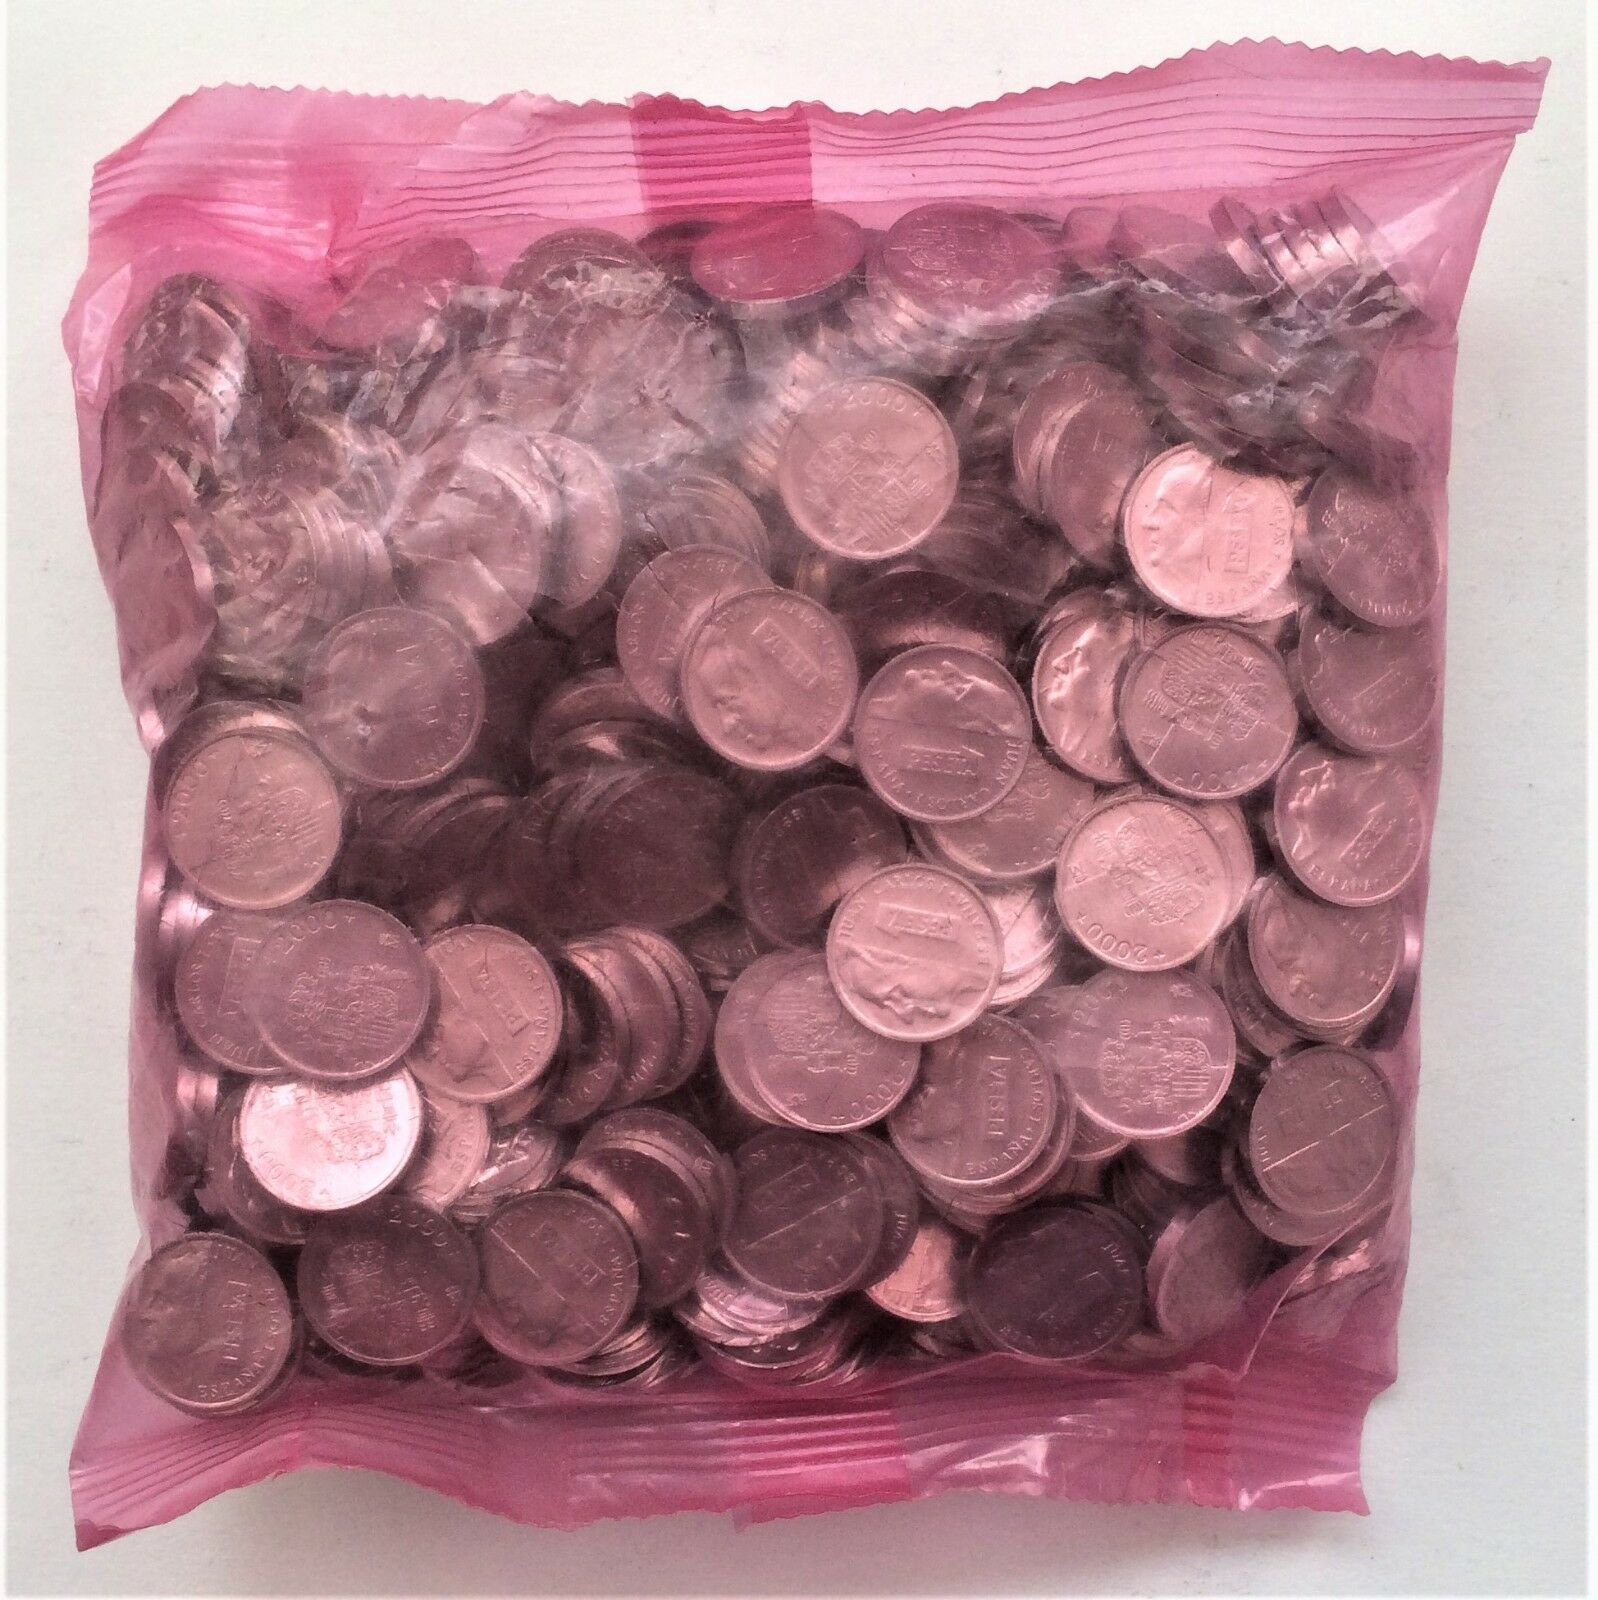 WHOLESALE 500 SPAIN UNC COINS of 2000 KM # 832 MILLENNIUM in BANK WRAPPED BAG